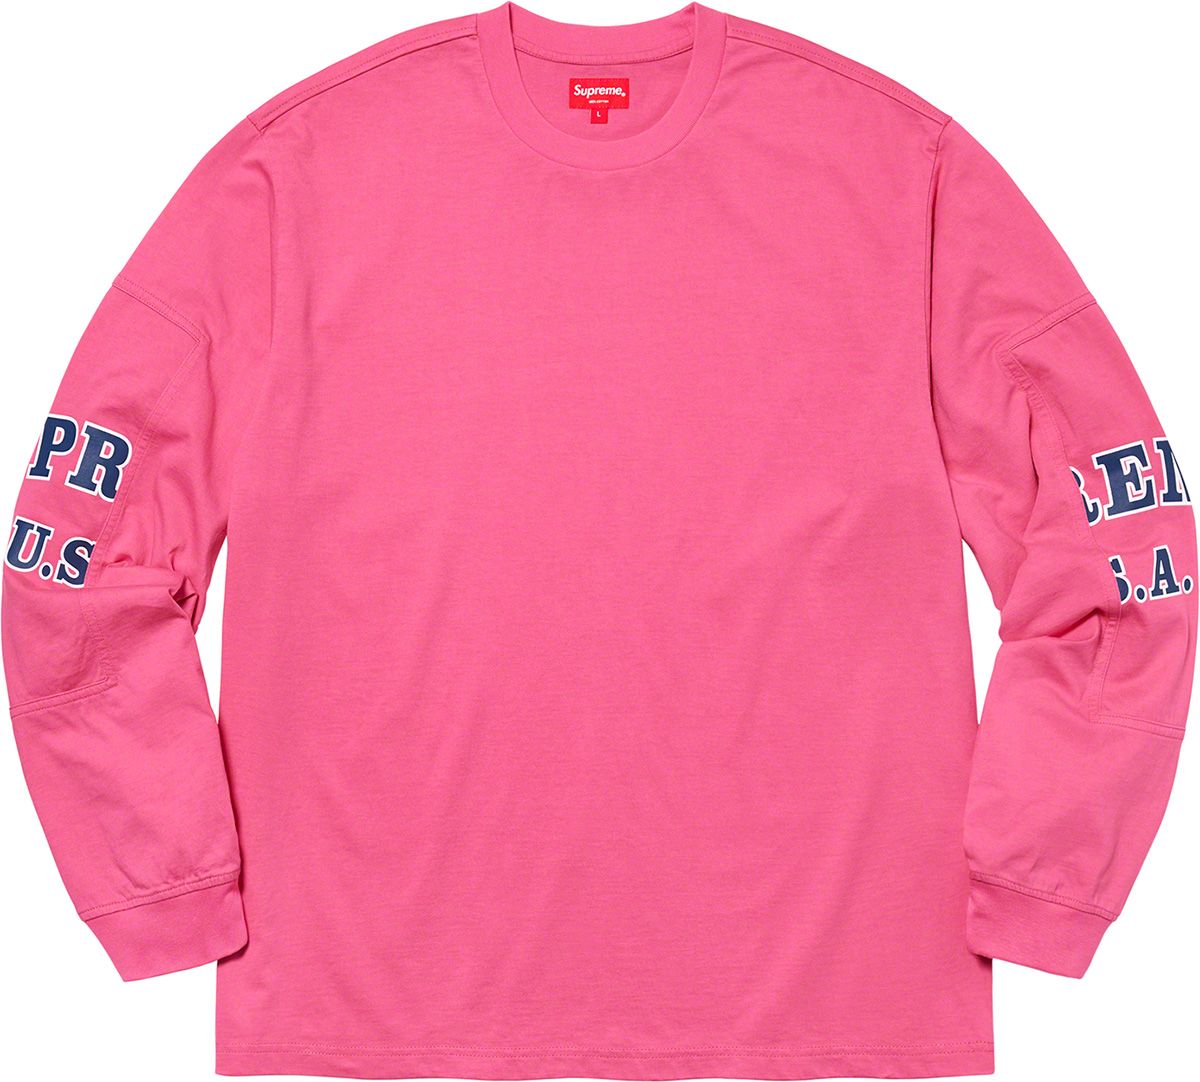 Cutout Sleeves L/S Top - Fall/Winter 2020 Preview – Supreme